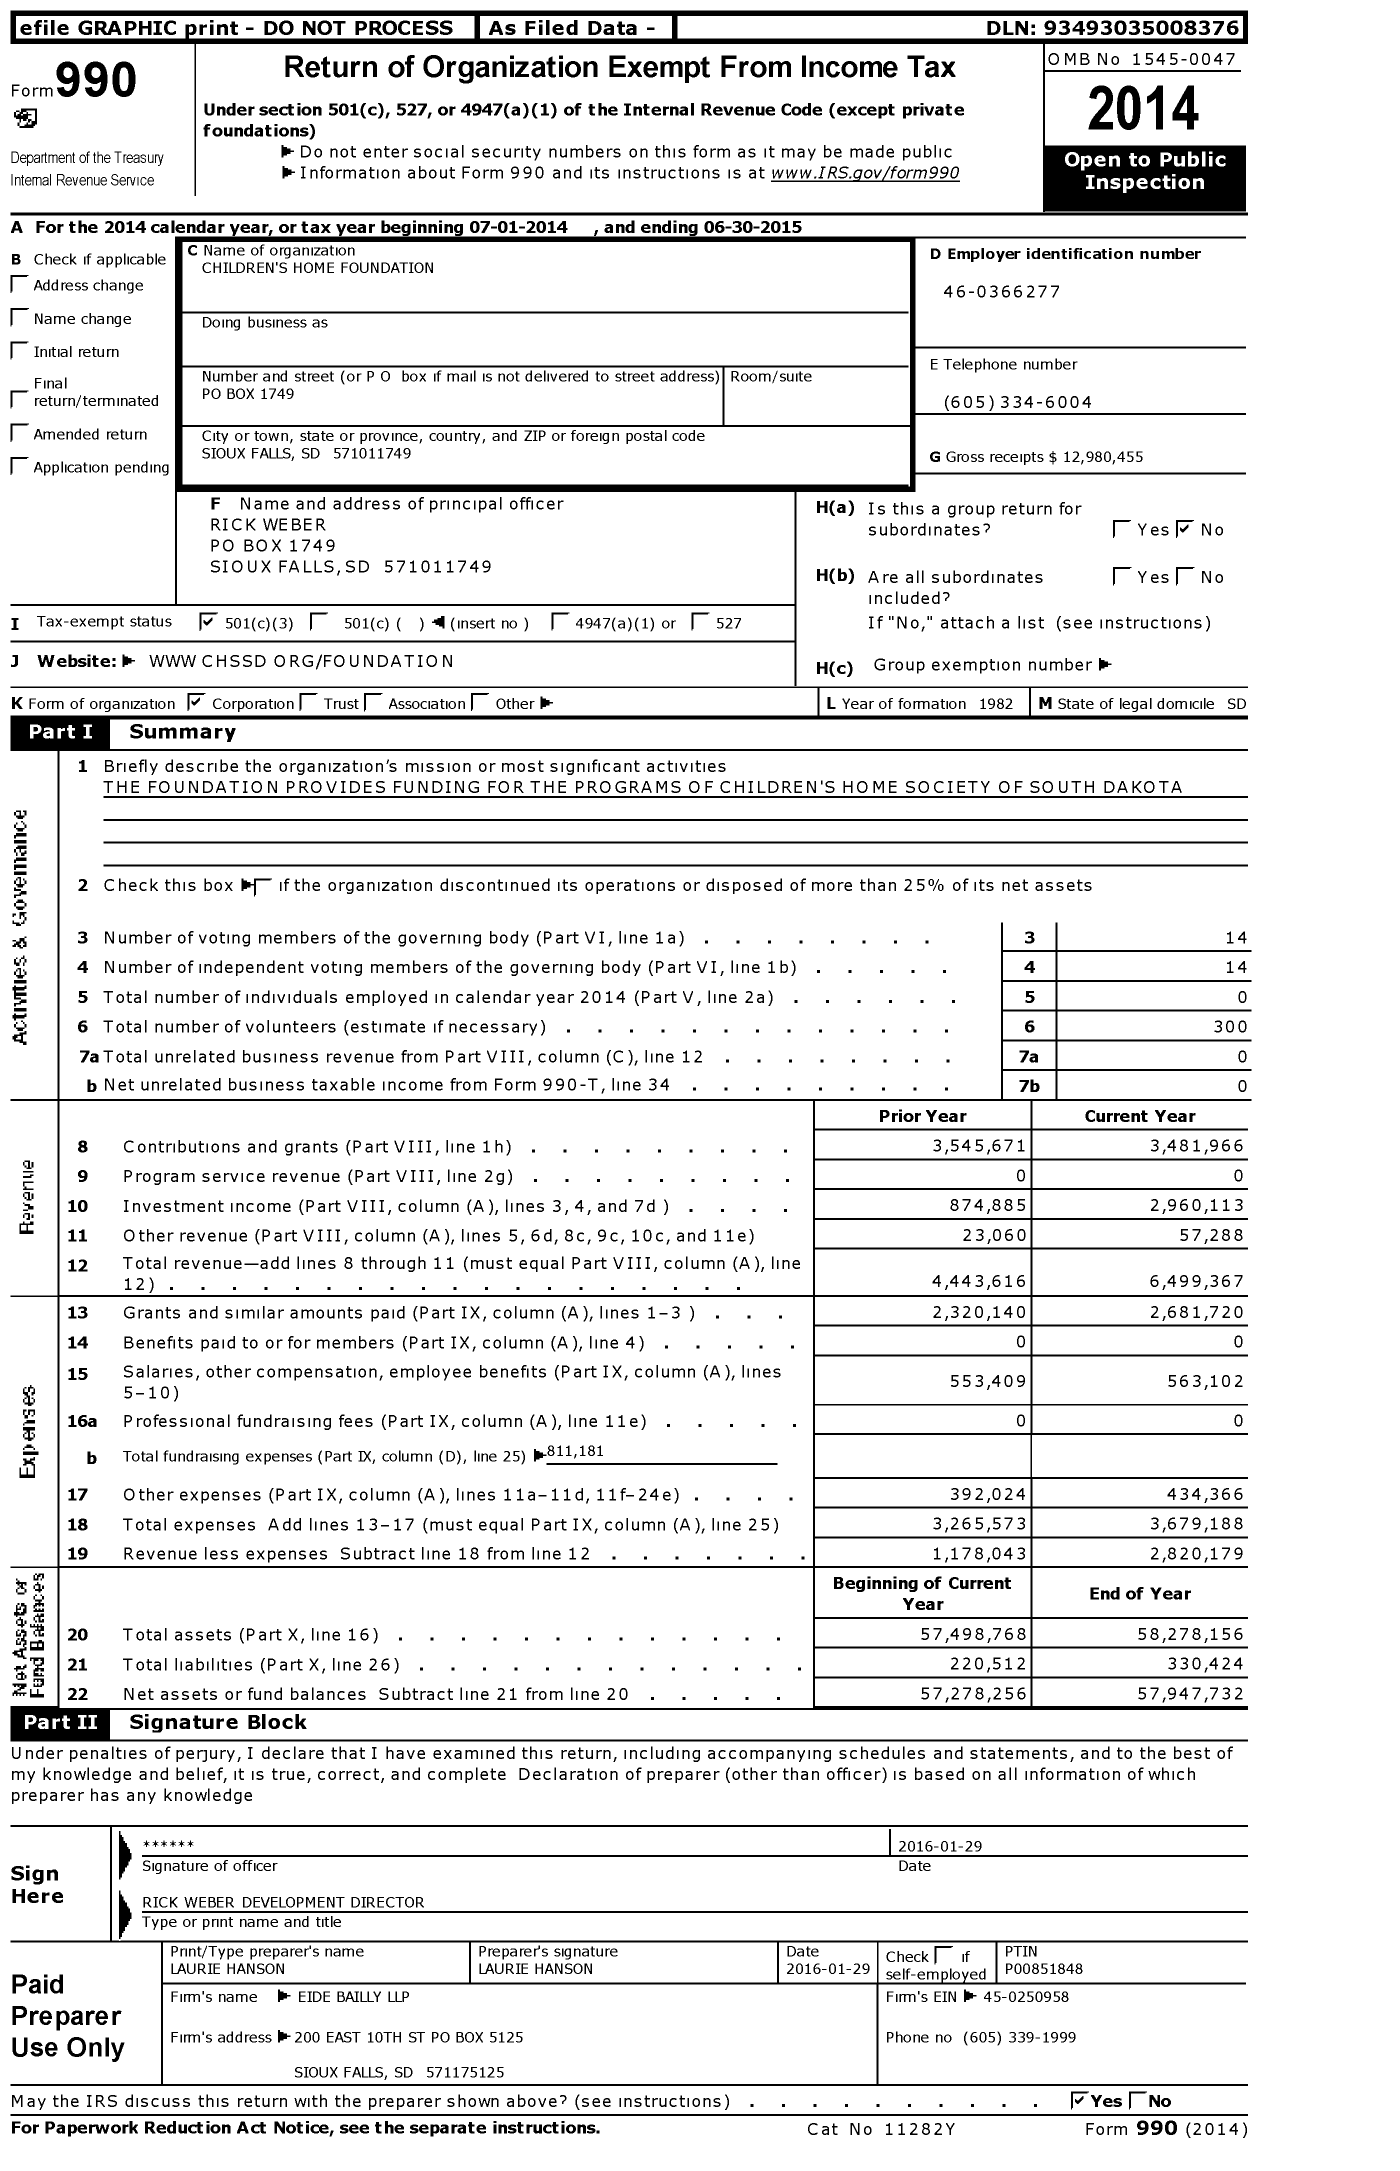 Image of first page of 2014 Form 990 for Children's Home Foundation (CHF)